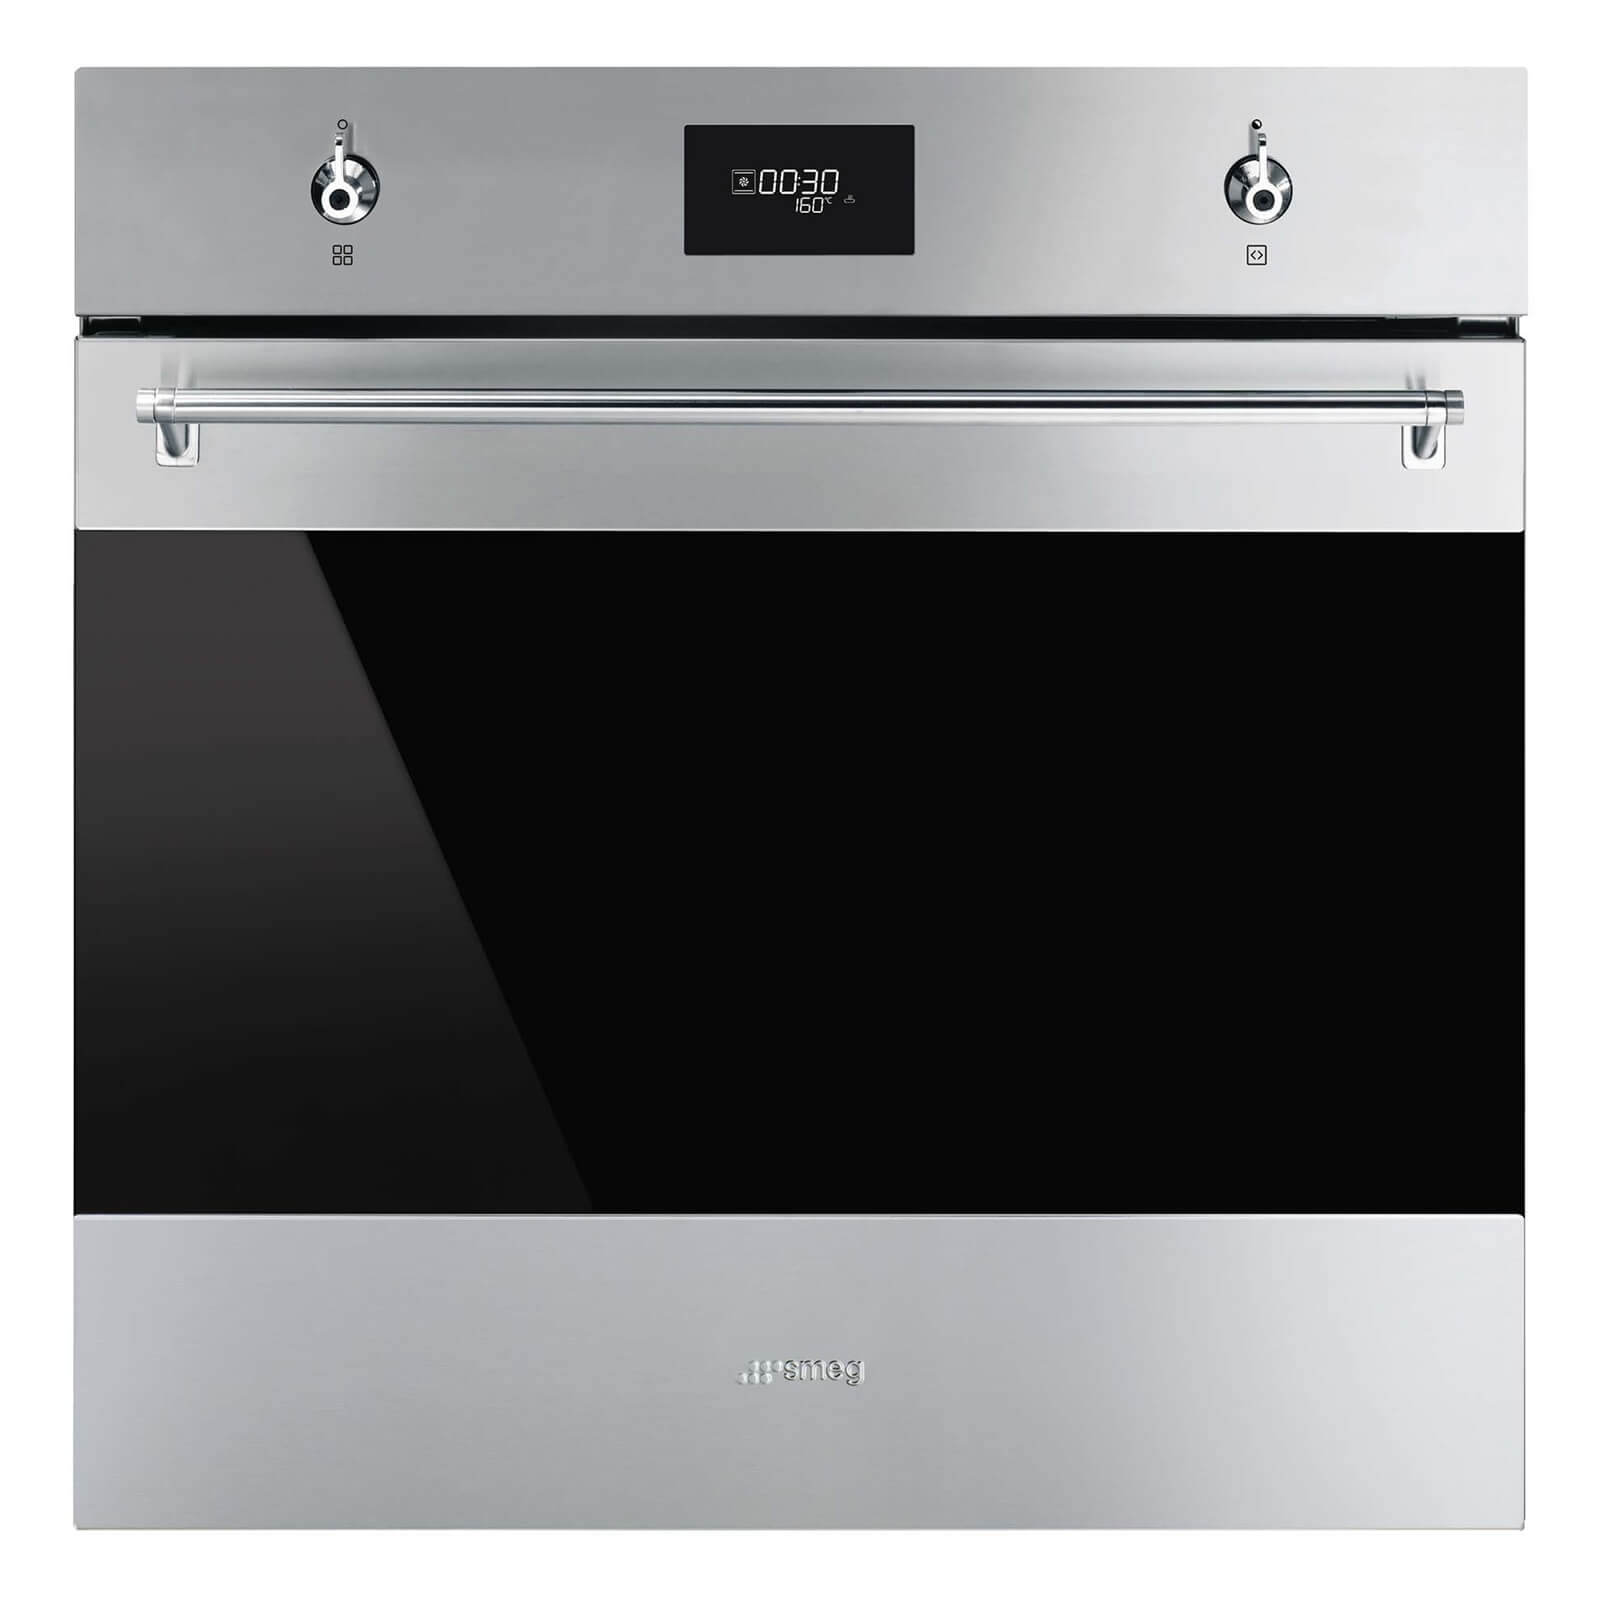 Smeg SF6301TVX 60cm Classic Single Oven - Stainless Steel